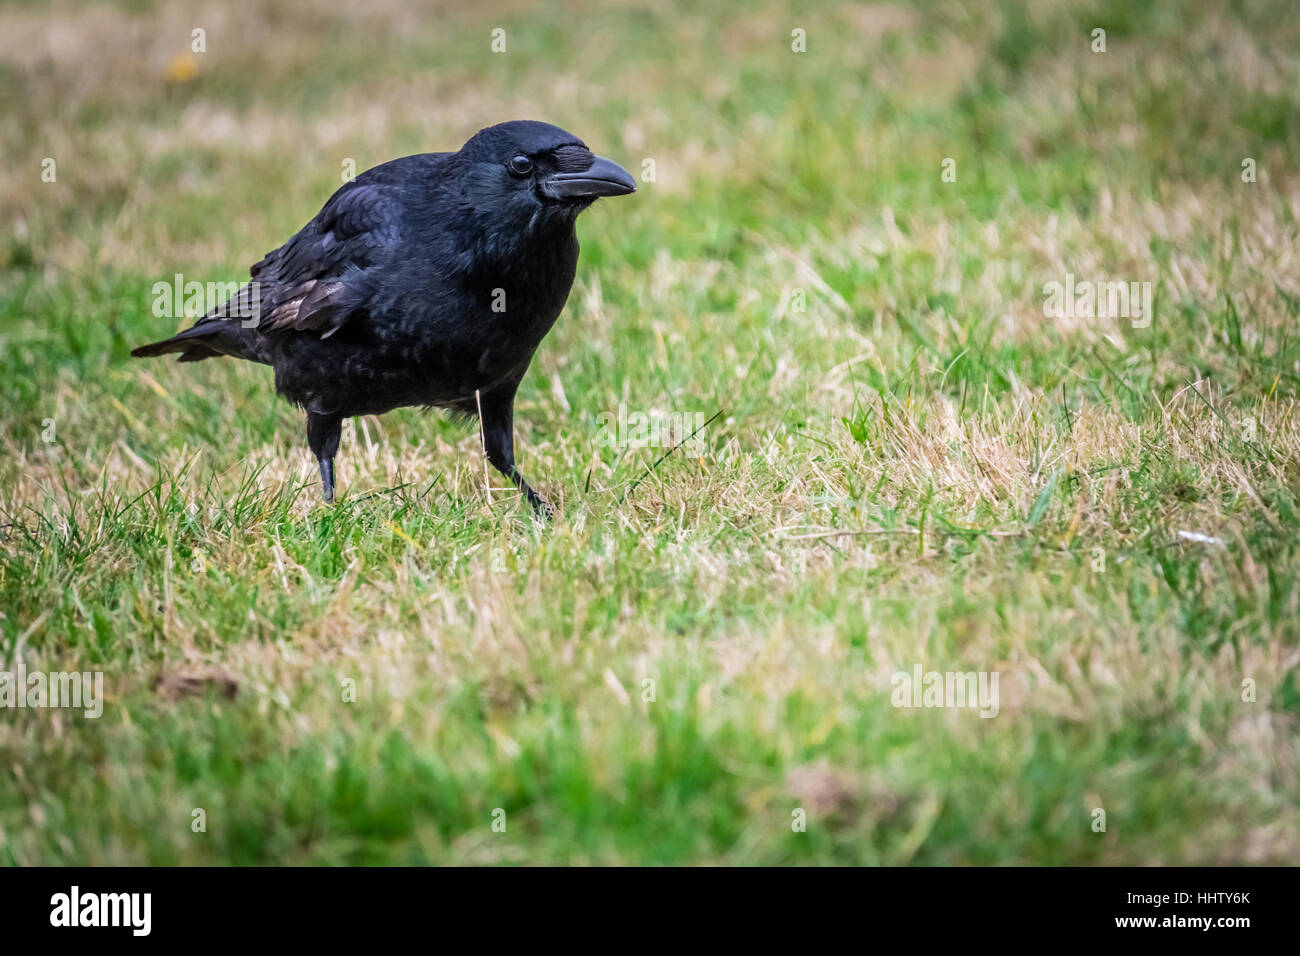 Black crow wading through the grass in a park in spring Stock Photo